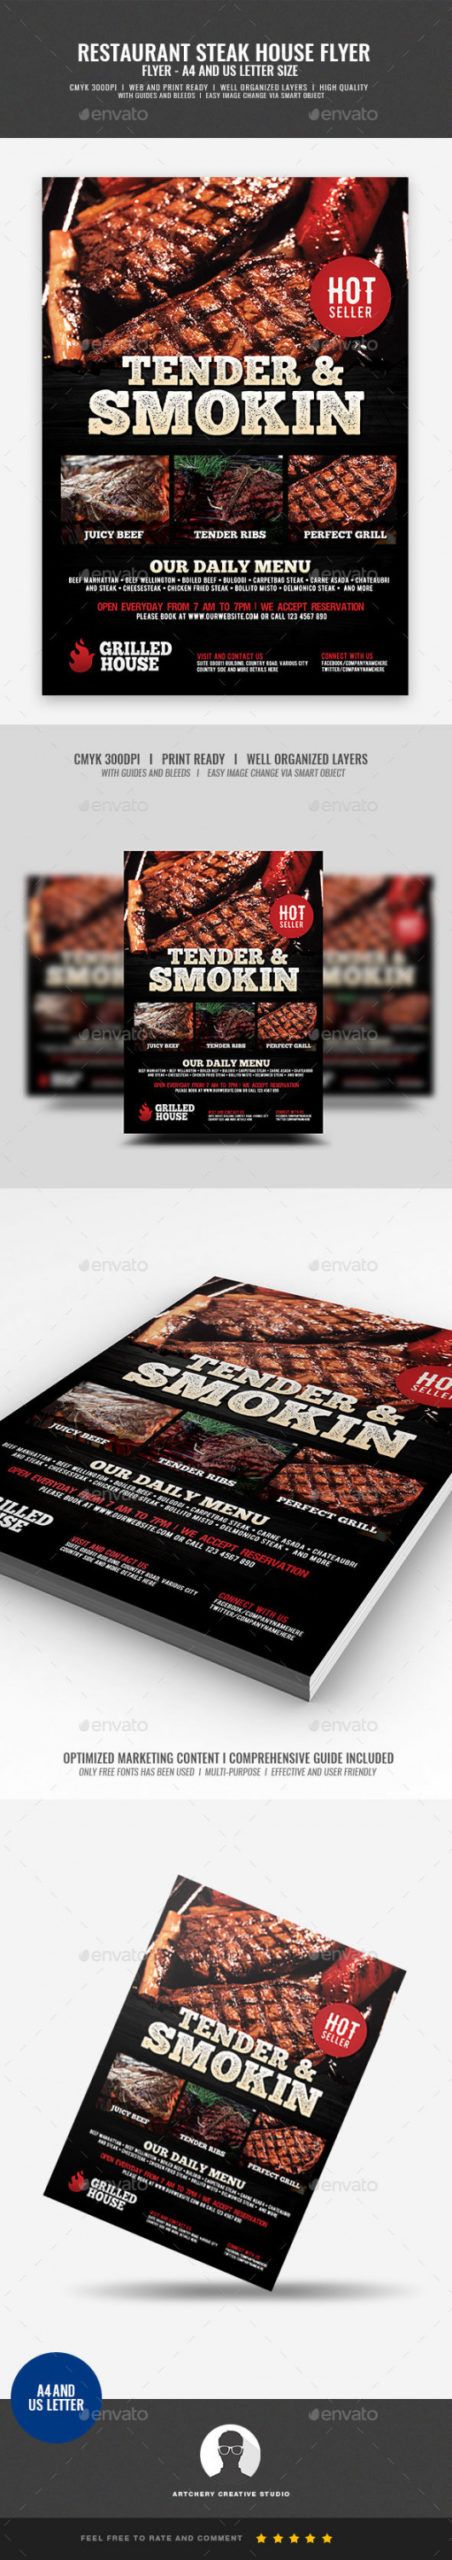 free pork ad stationery and design templates from graphicriver bull roast flyer template